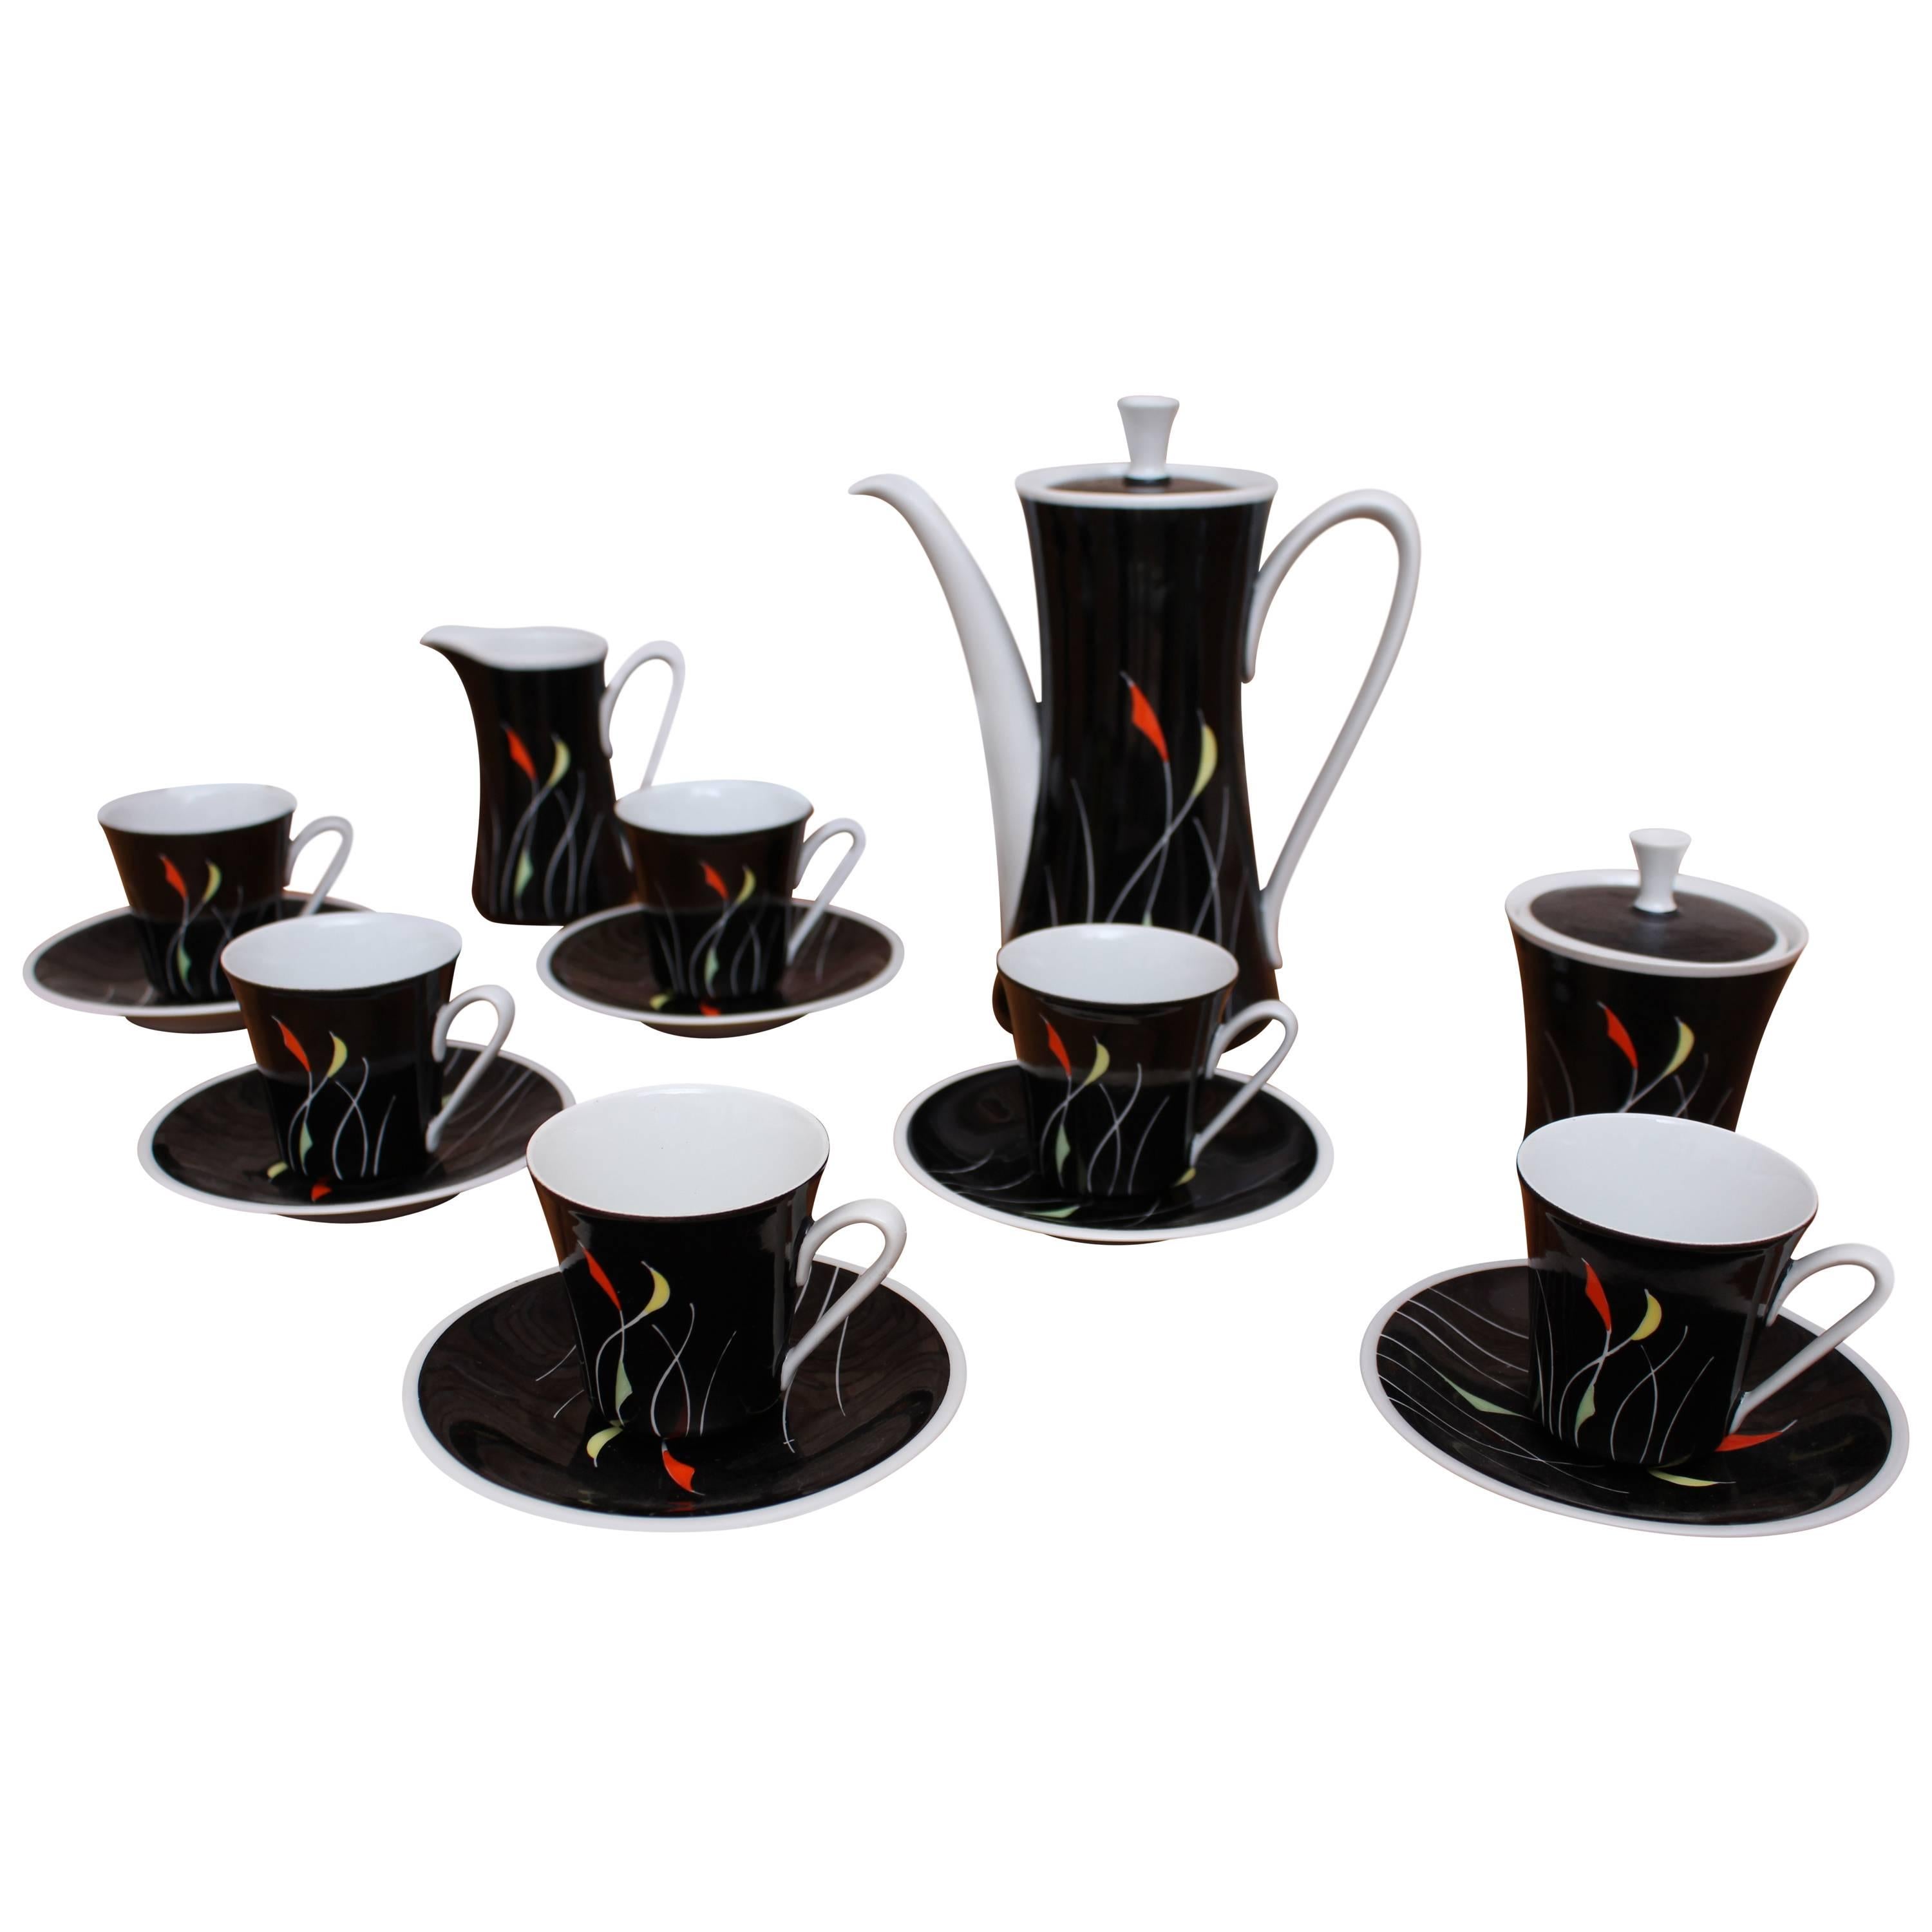 Porcelain Coffee Set from Kahla in Black and White, 1960s, Hand-painted Pattern